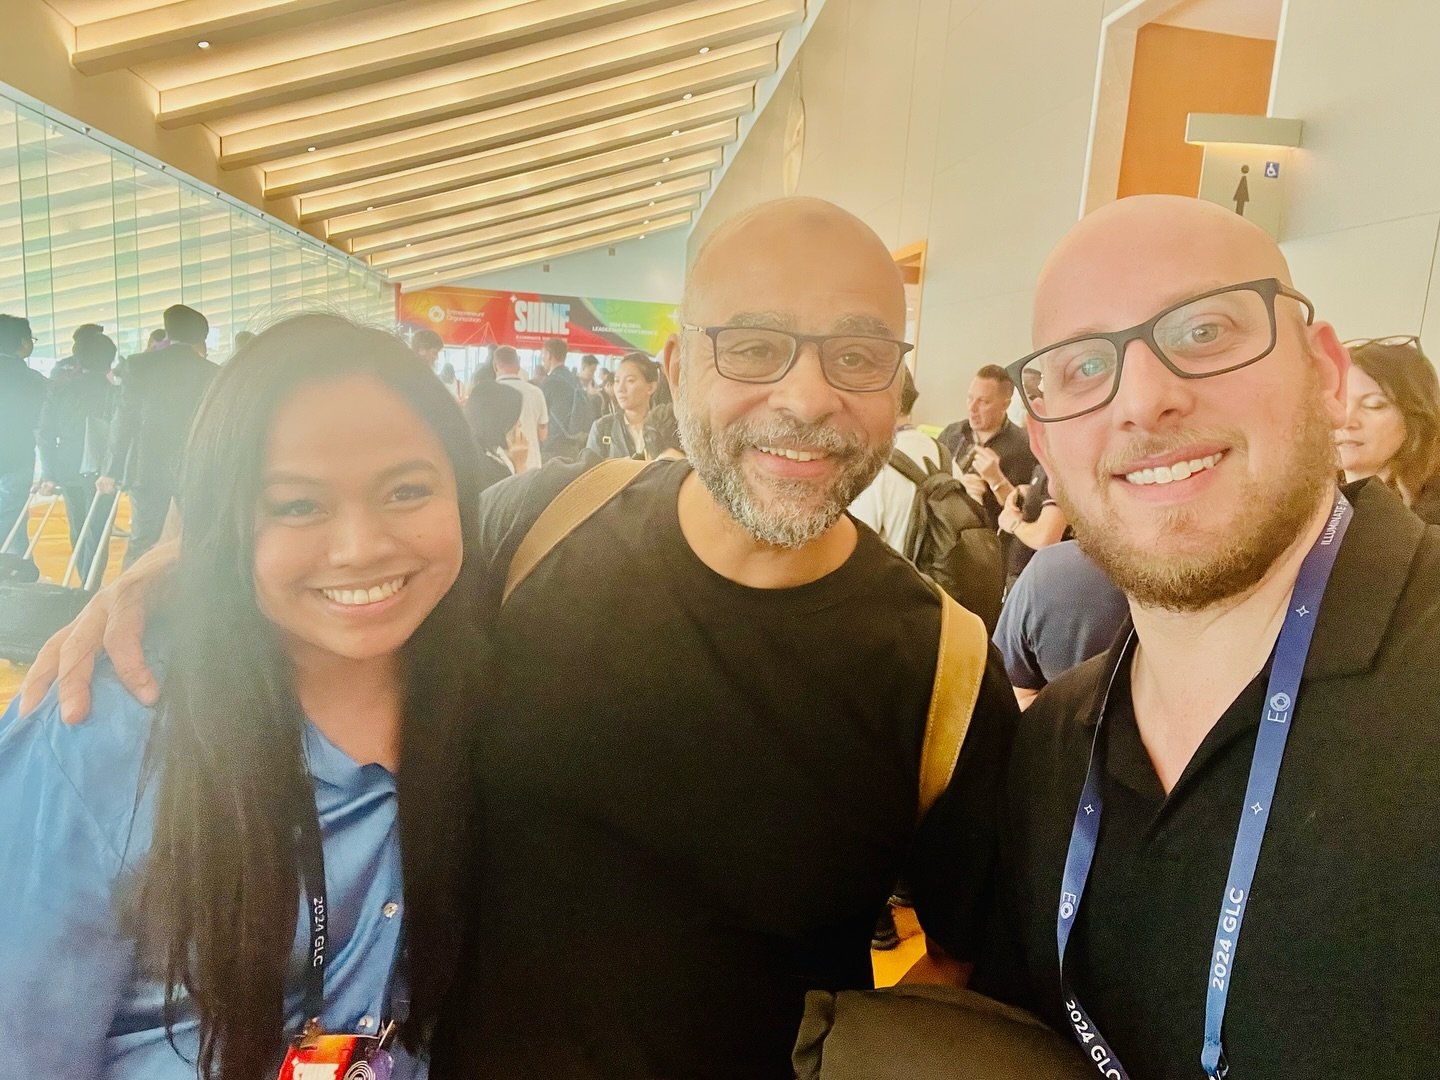 What an honor for our Founder team at the Global AI Council! @officialkatehancock and @realdrobbins, our PR Director, had the incredible opportunity to meet and converse with Mo Gawdat @mo_gawdat, the former Chief Business Officer at Google X and a l